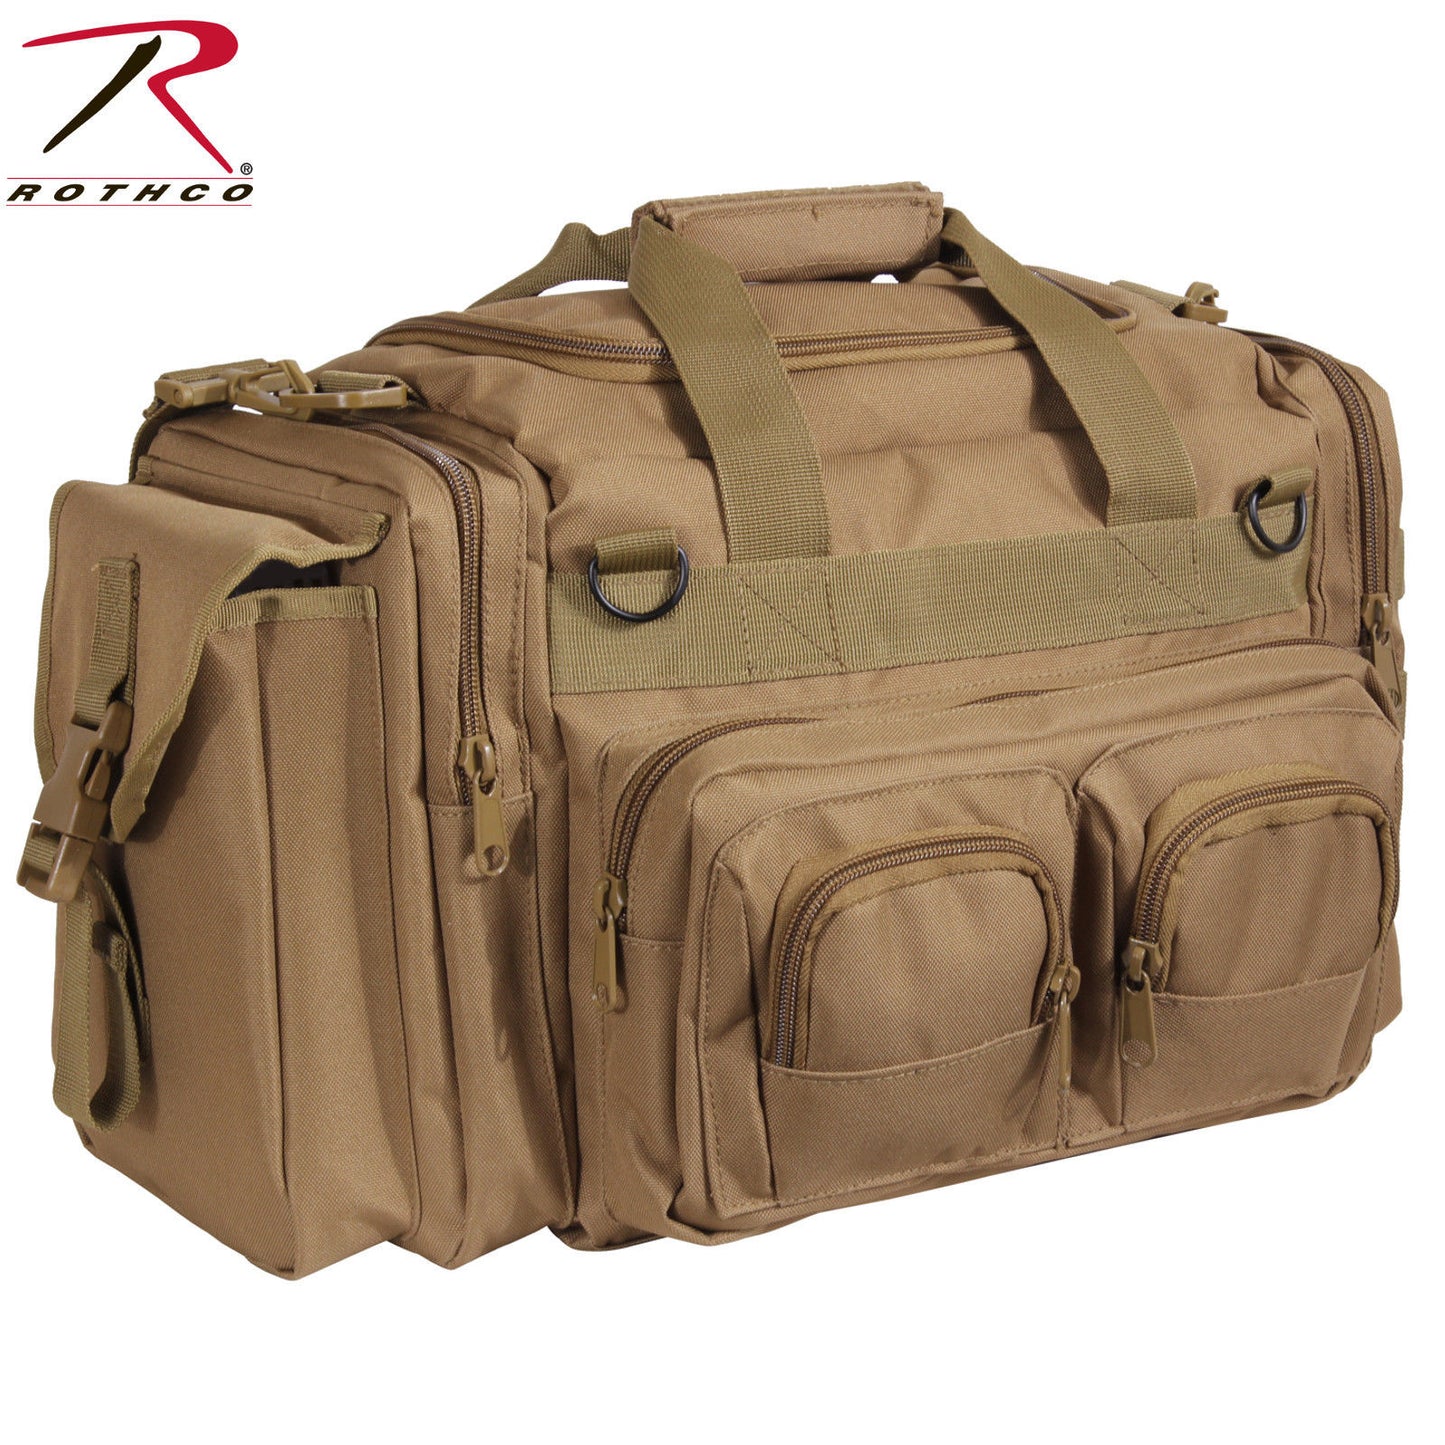 Rothco Concealed Carry Bag - Coyote Brown Heavyweight Polyester Gear Bag 2653